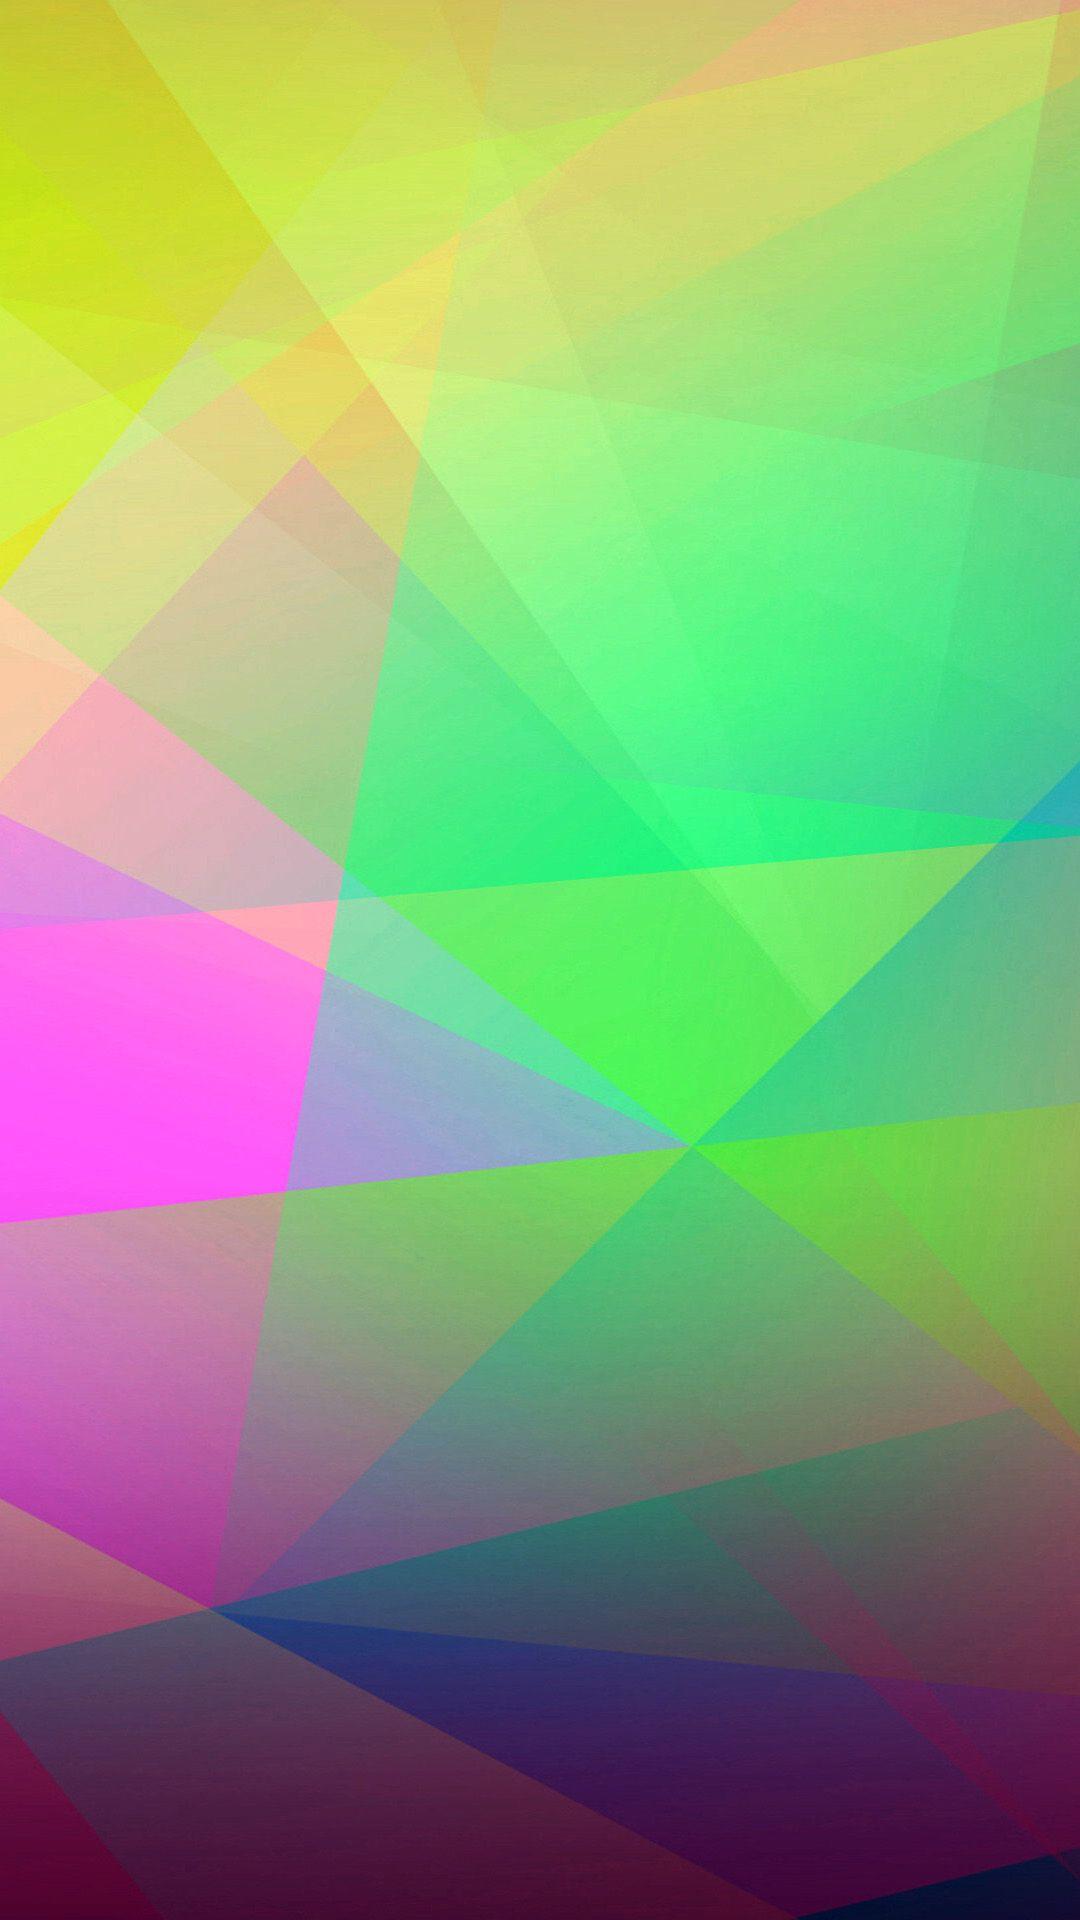 Wallpaper android 4k 5k wallpaper abstract yellow blue green OS 3436